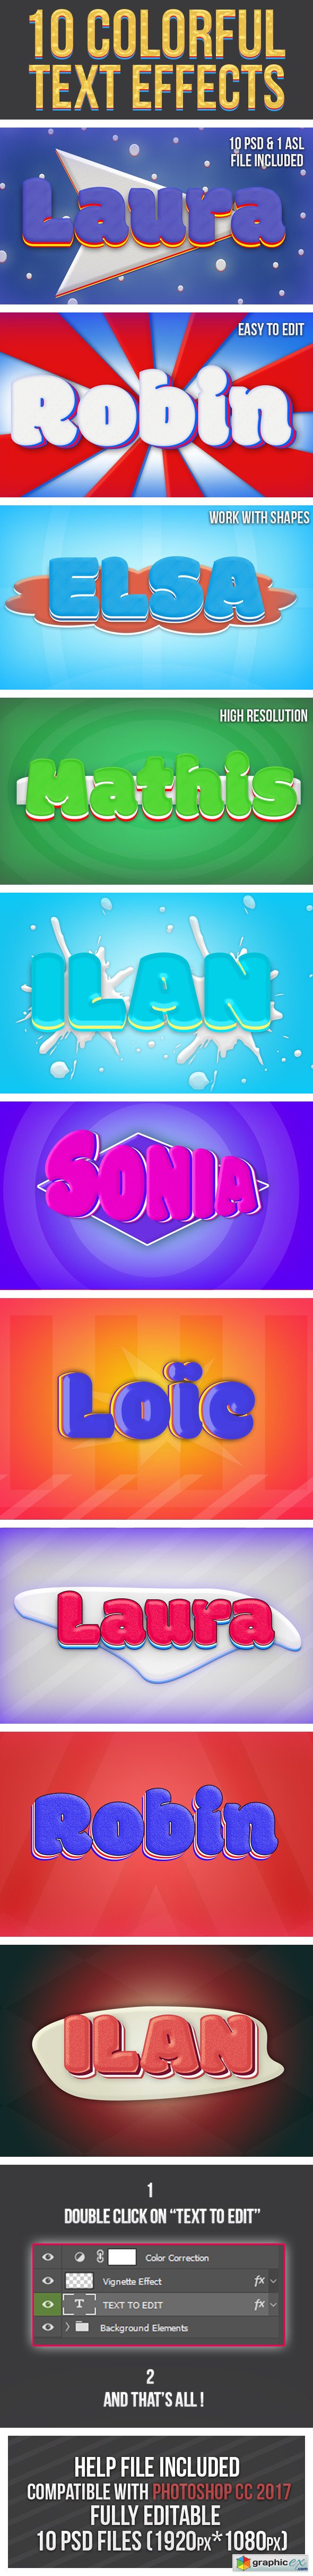 Colorful Text Effects